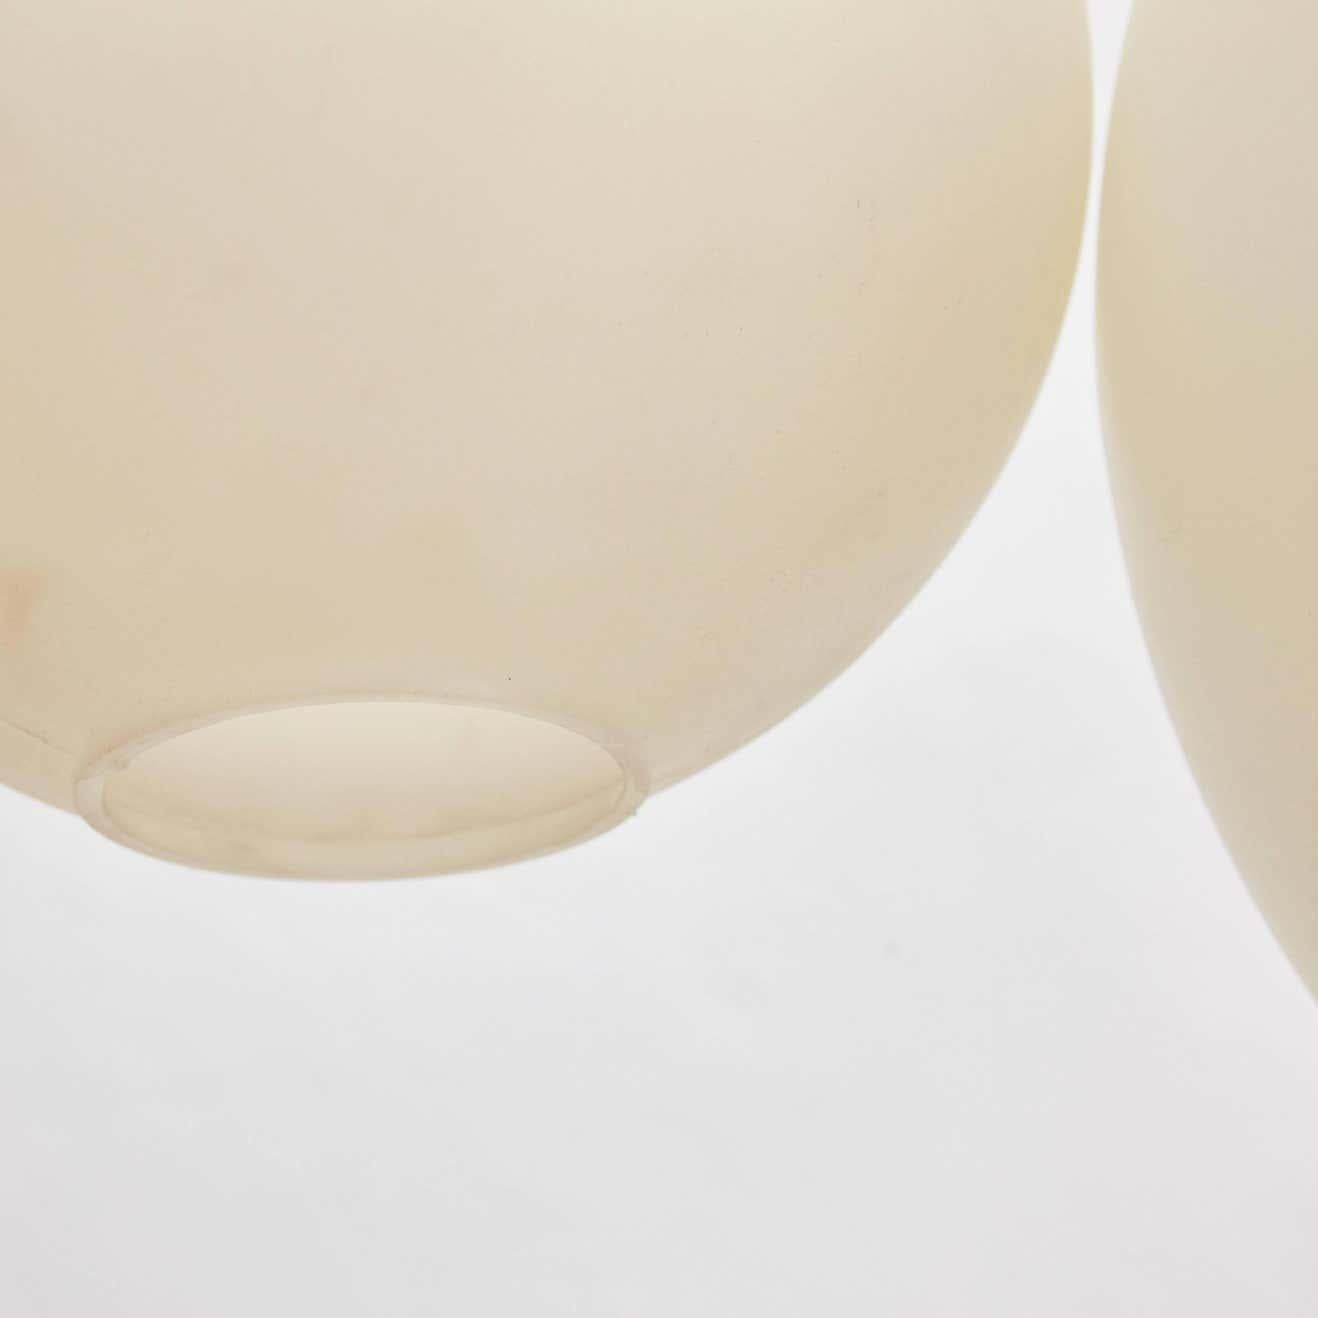 Set of Three White Pending Lamps by Miguel Mila for Tramo in Plastic, circa 1970 In Good Condition For Sale In Barcelona, Barcelona